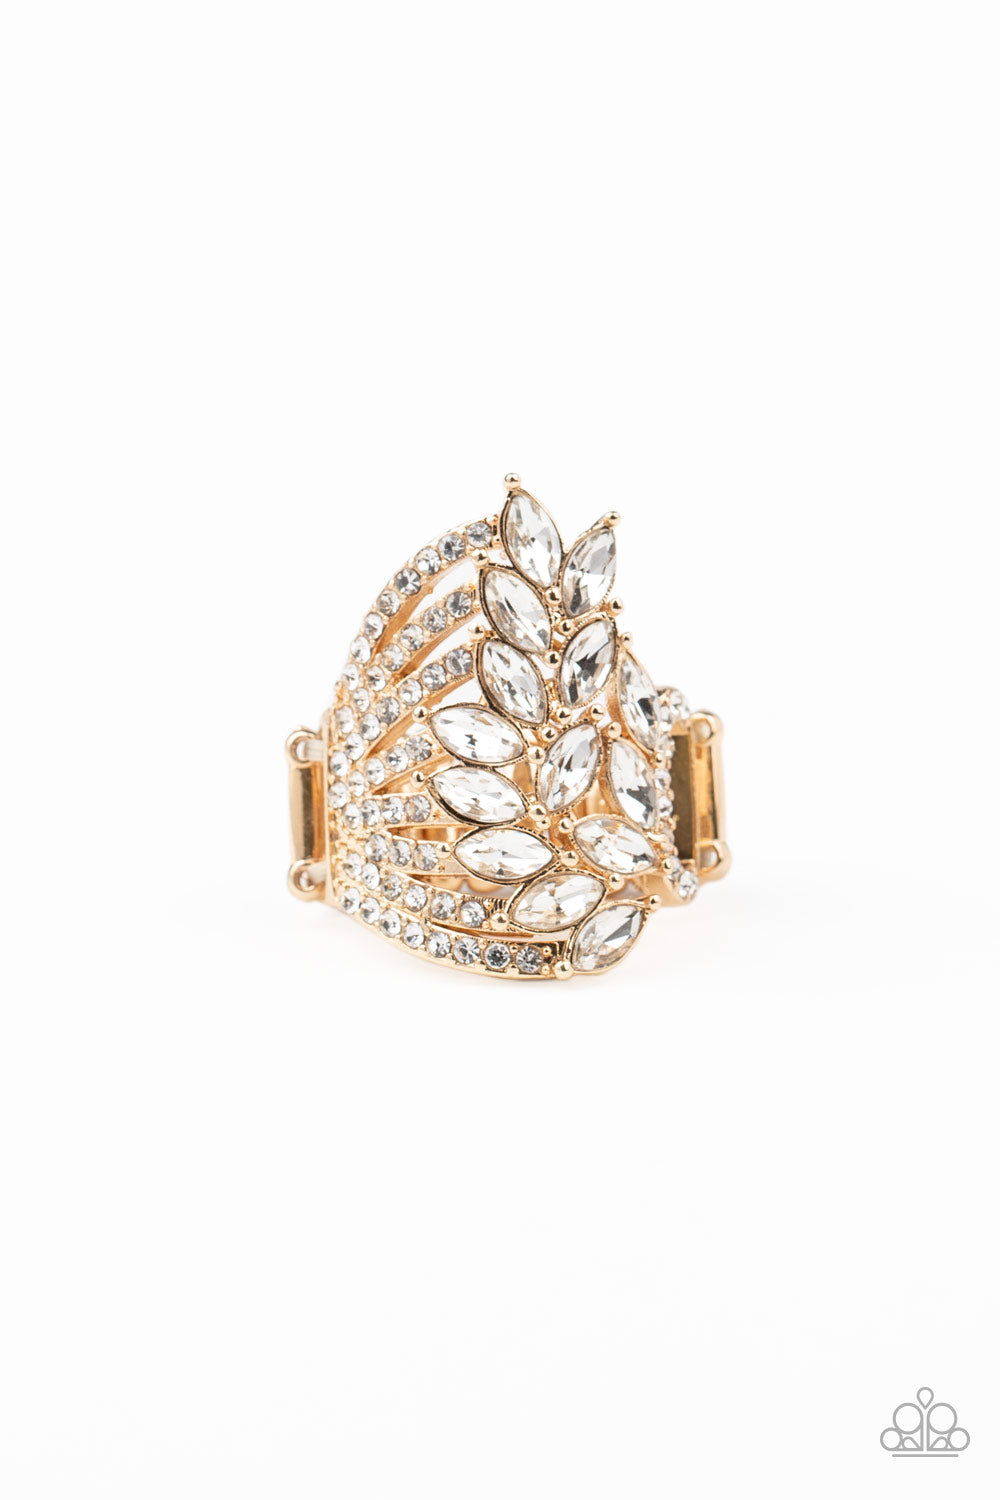 Attached to white rhinestone encrusted gold bands, a cascade of white marquise cut rhinestones fans across the finger, coalescing into a gorgeous statement maker. Features a stretchy band for a flexible fit. Life of the Party .